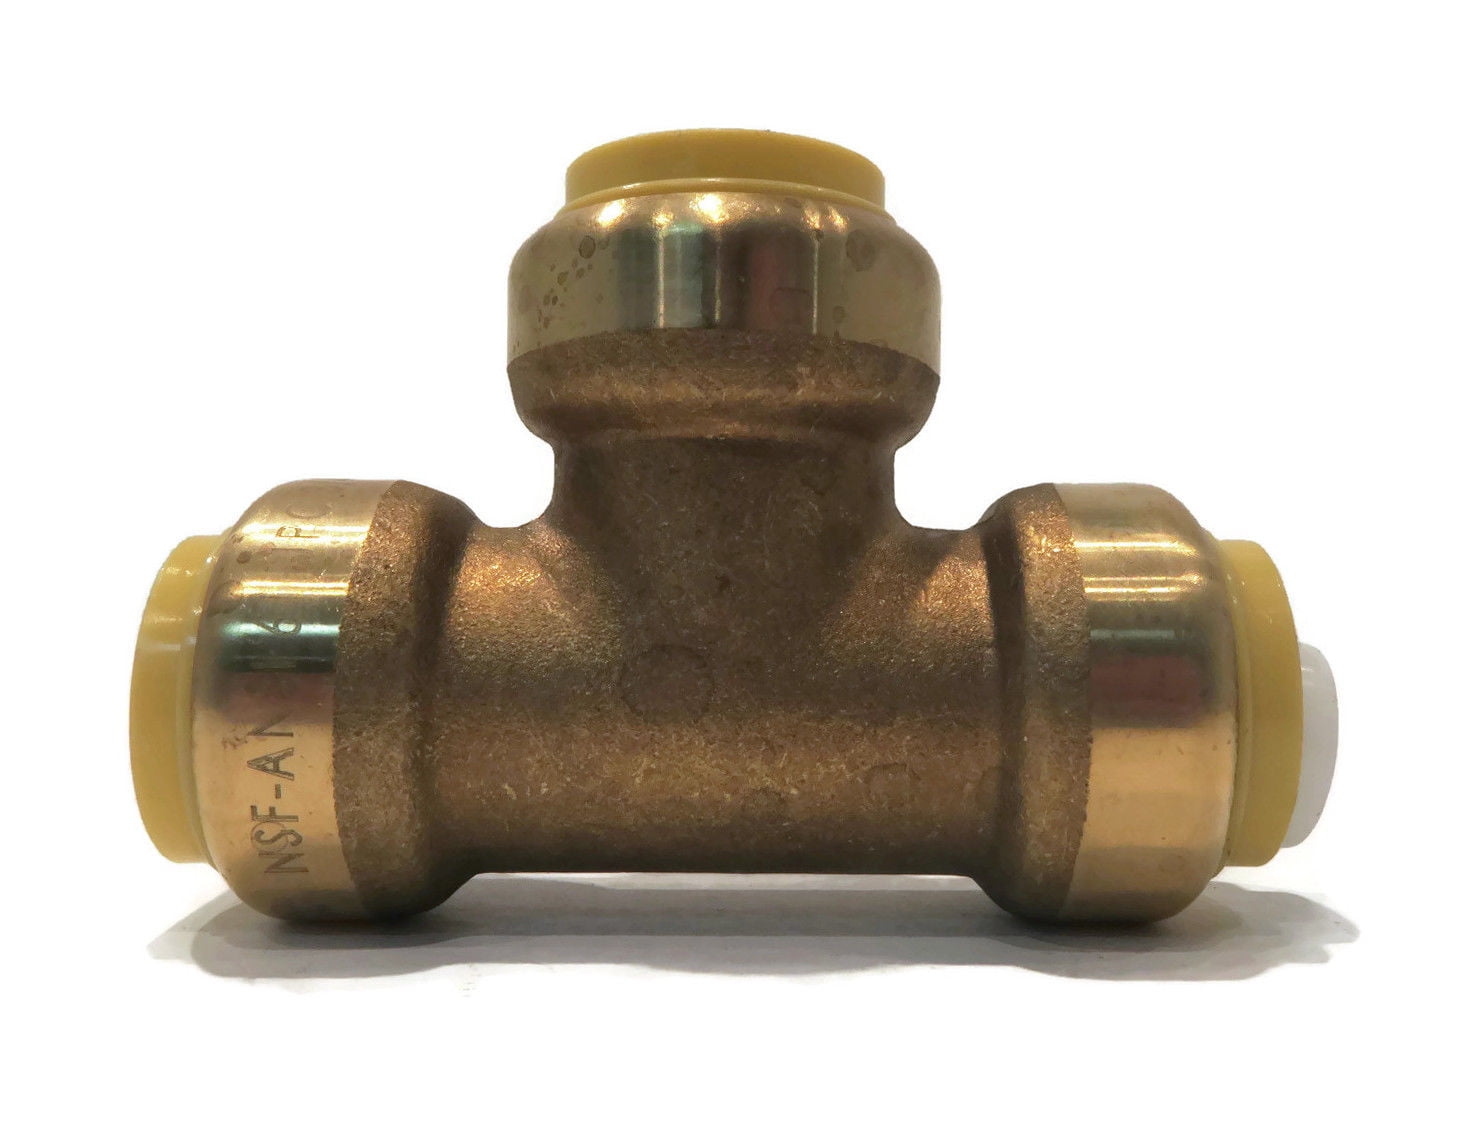 25 Push-Fit Push to Connect LF Brass Tees 3/4" x 3/4" x 1/2" Sharkbite Style 